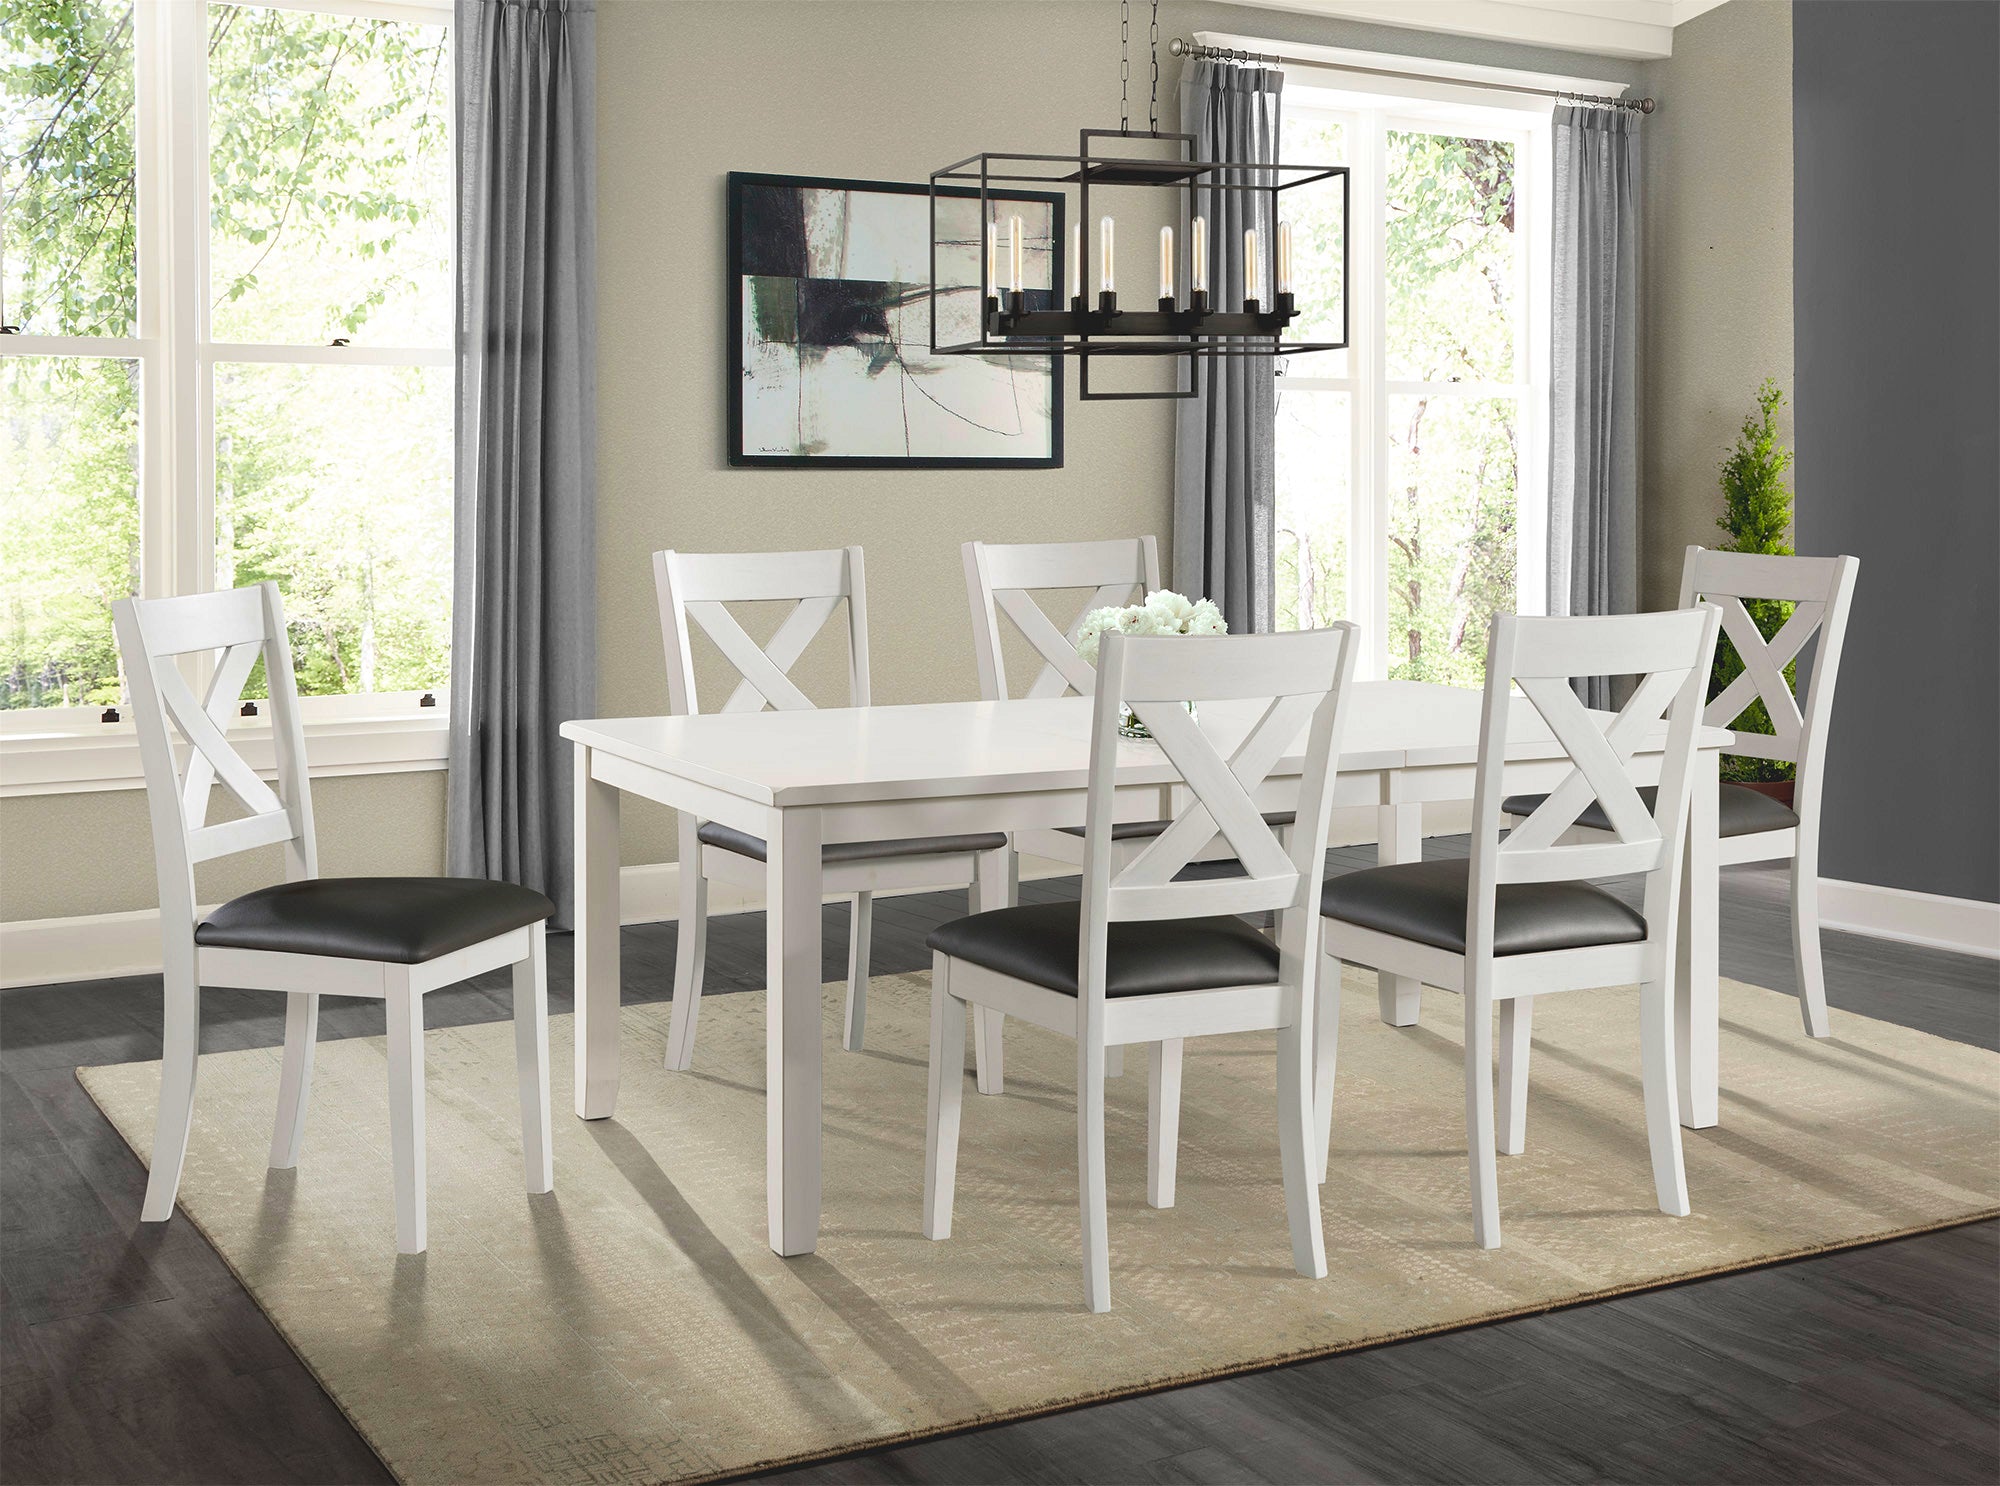 Rolex White 5 Piece Dining Set With Upholstered Chair Kanes Furniture